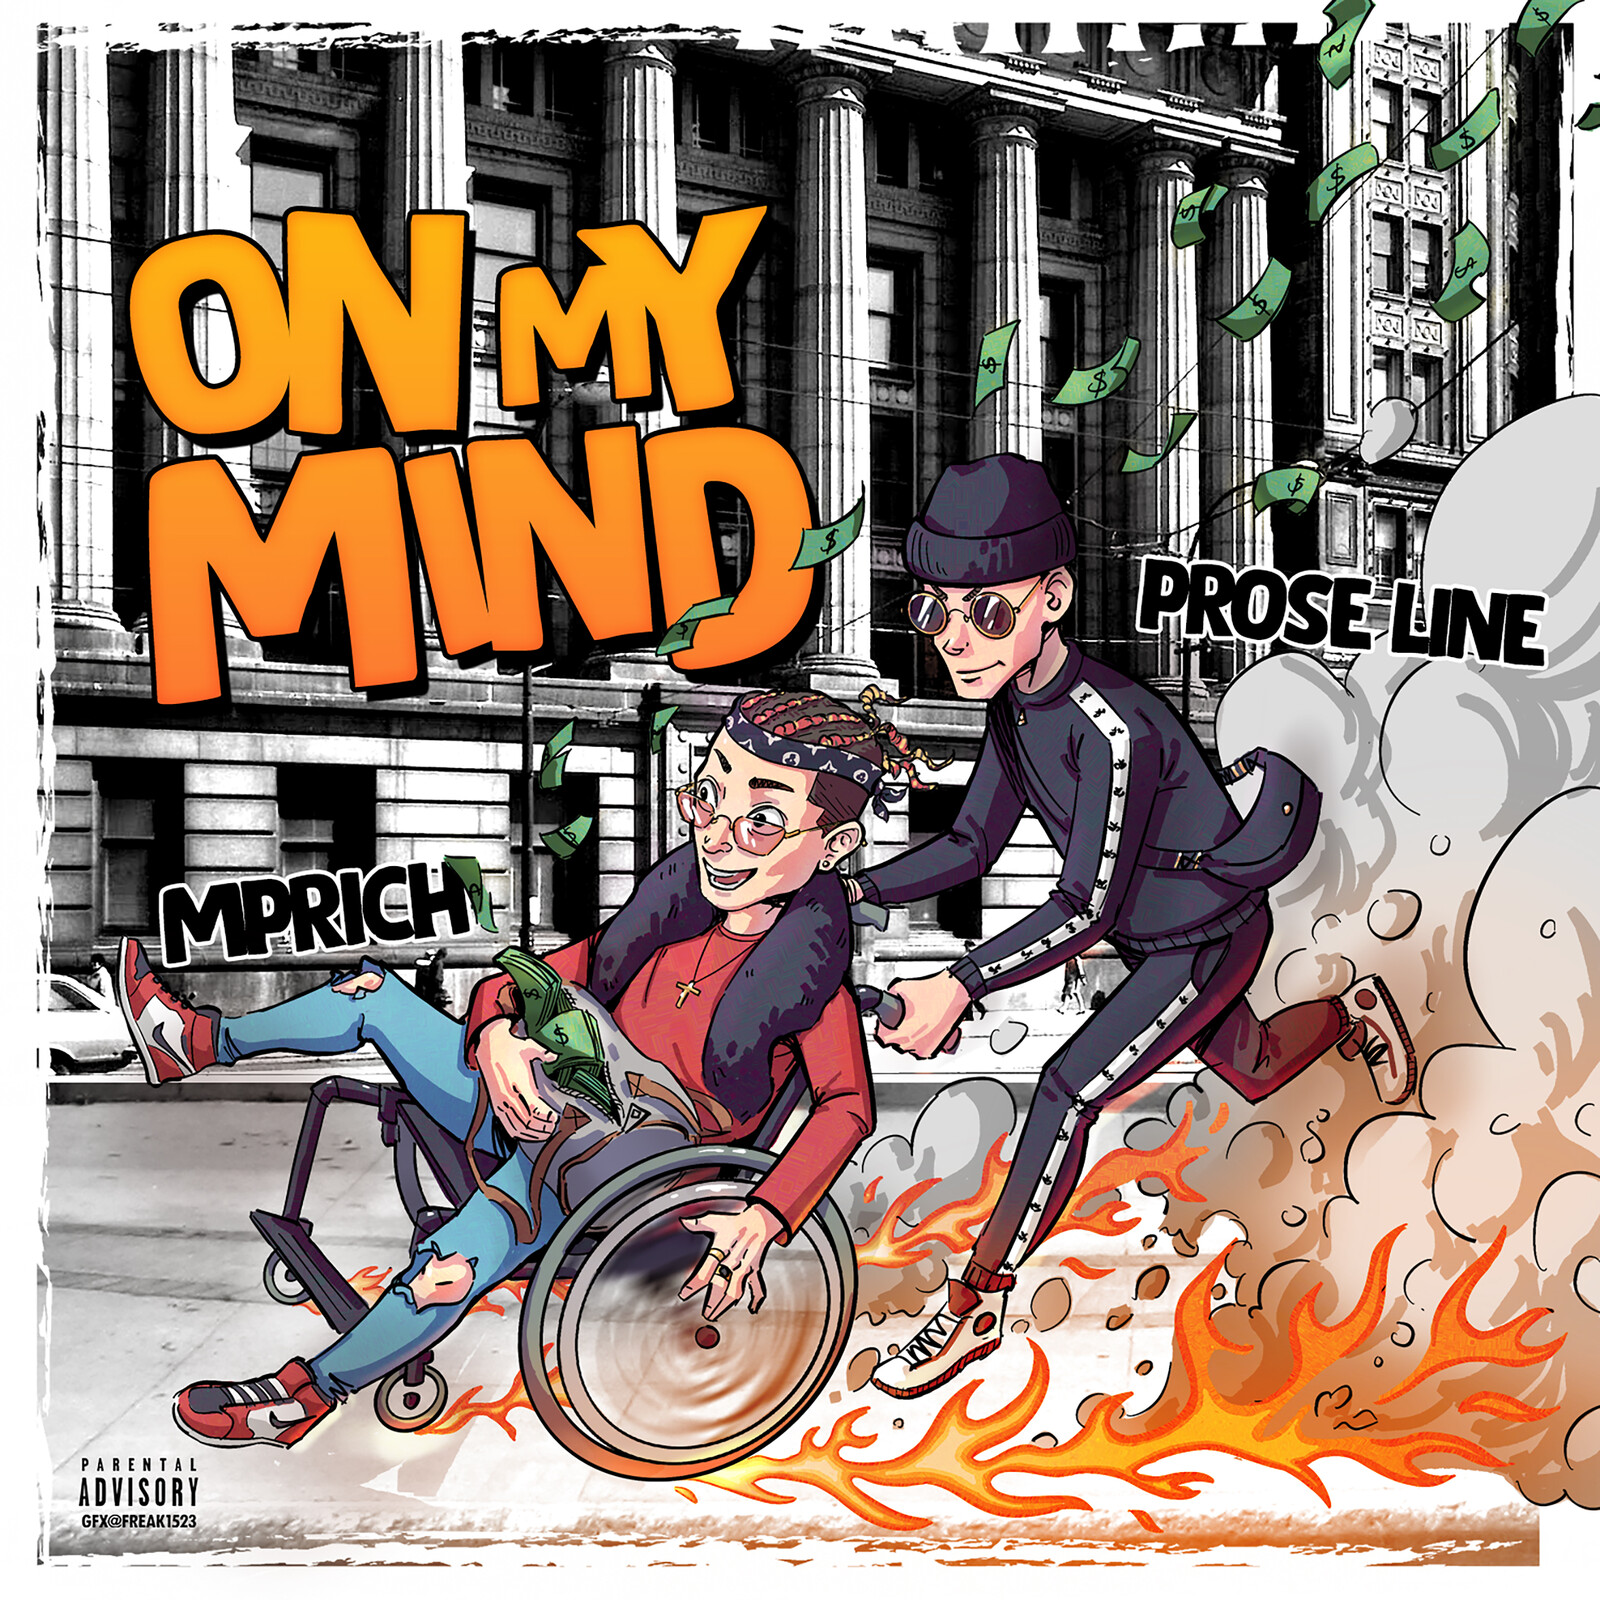 Album Cover collaboration -  On My Mind by PRØSE LINE feat MPRICH